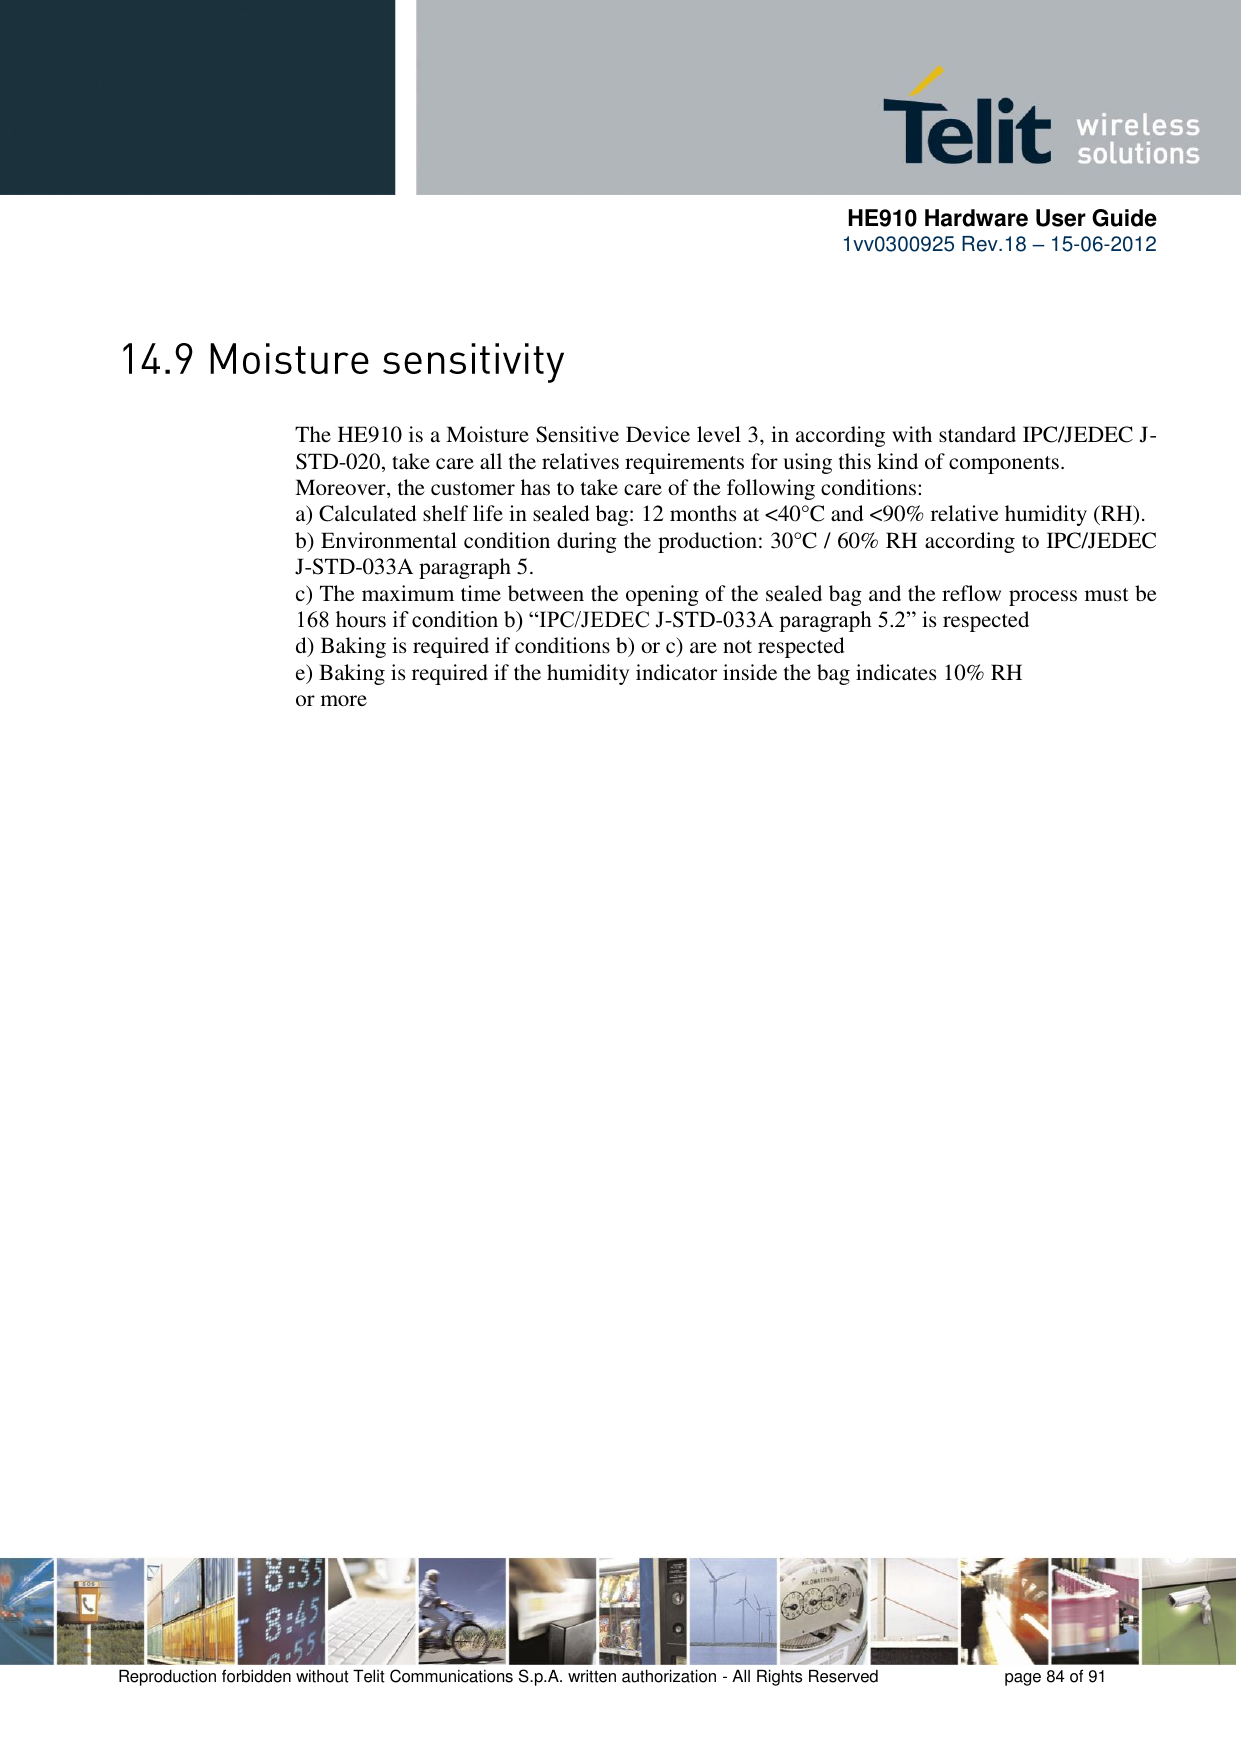      HE910 Hardware User Guide 1vv0300925 Rev.18 – 15-06-2012    Reproduction forbidden without Telit Communications S.p.A. written authorization - All Rights Reserved    page 84 of 91    The HE910 is a Moisture Sensitive Device level 3, in according with standard IPC/JEDEC J-STD-020, take care all the relatives requirements for using this kind of components. Moreover, the customer has to take care of the following conditions: a) Calculated shelf life in sealed bag: 12 months at &lt;40°C and &lt;90% relative humidity (RH). b) Environmental condition during the production: 30°C / 60% RH according to IPC/JEDEC J-STD-033A paragraph 5. c) The maximum time between the opening of the sealed bag and the reflow process must be 168 hours if condition b) “IPC/JEDEC J-STD-033A paragraph 5.2” is respected d) Baking is required if conditions b) or c) are not respected e) Baking is required if the humidity indicator inside the bag indicates 10% RH or more 